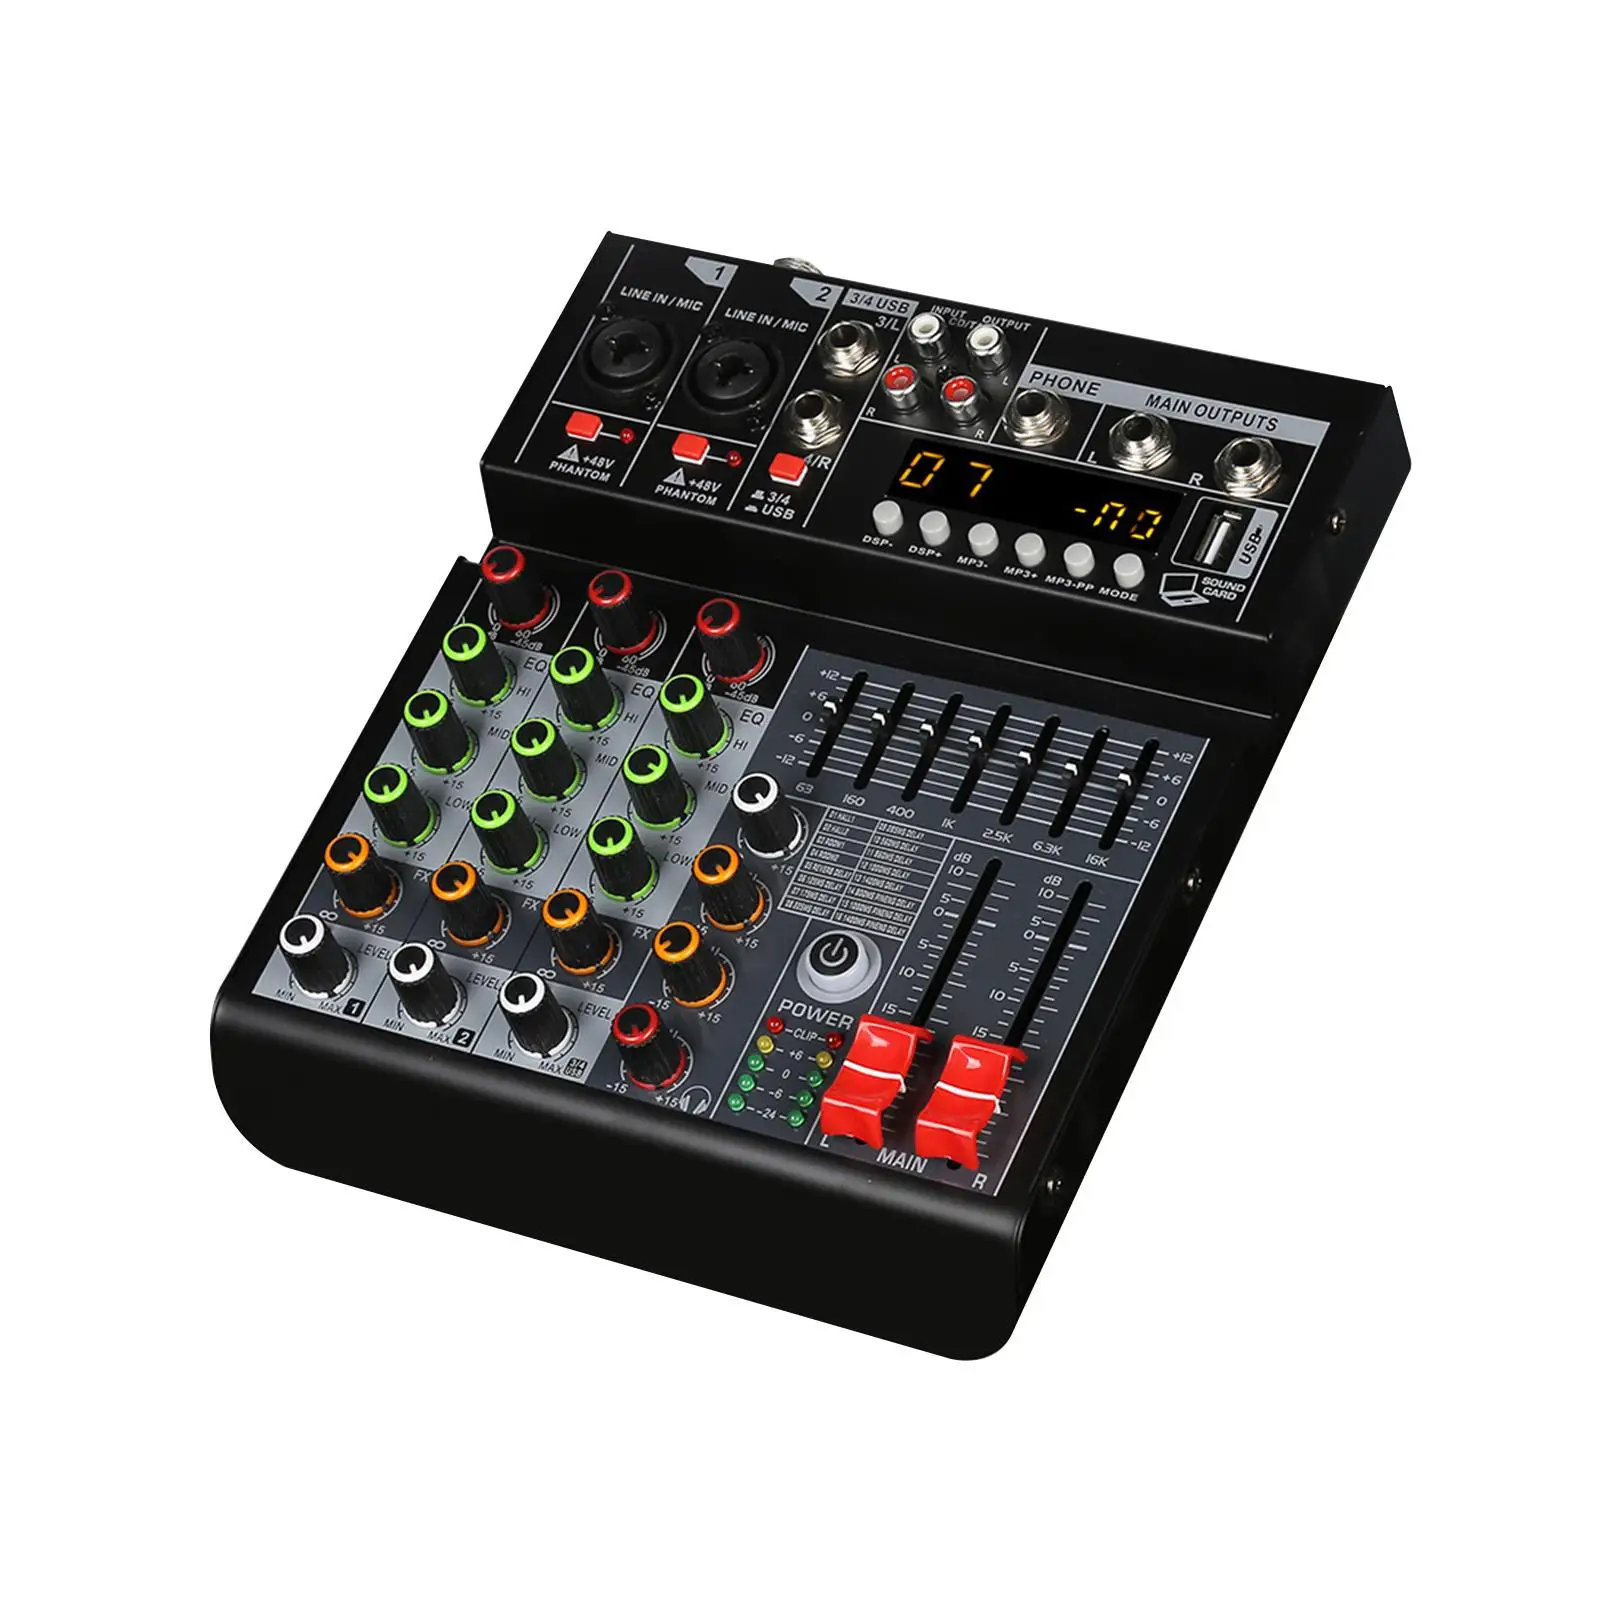 4 Channel Mixer Sound Mixing Console Digital Mixer 2 Channel Mono Input AUX for Live Studio Stereo 48V Phantom Power EU Adapter